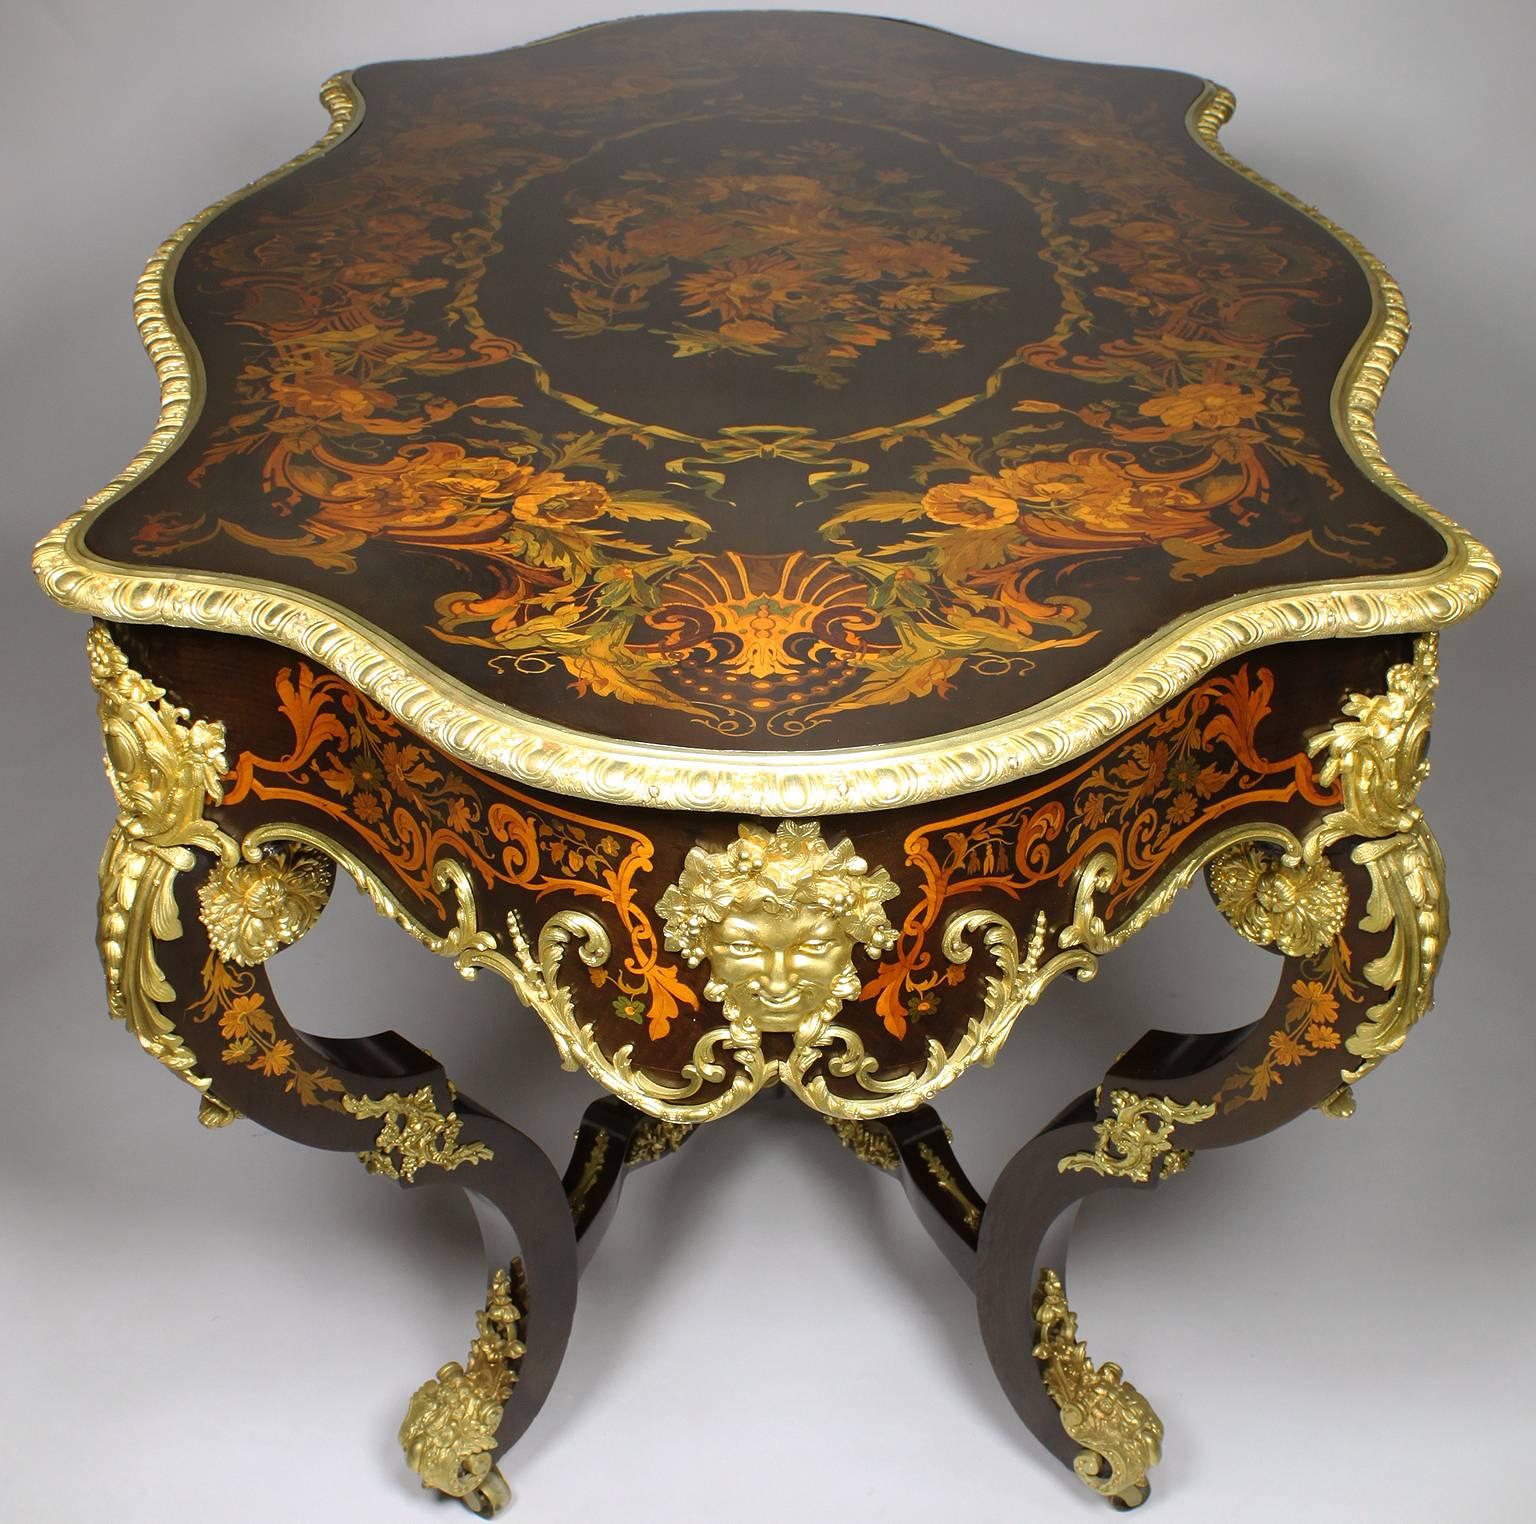 Fine Italian 19th Century Floral Marquetry and Gilt-Bronze Mounted Centre Table 9